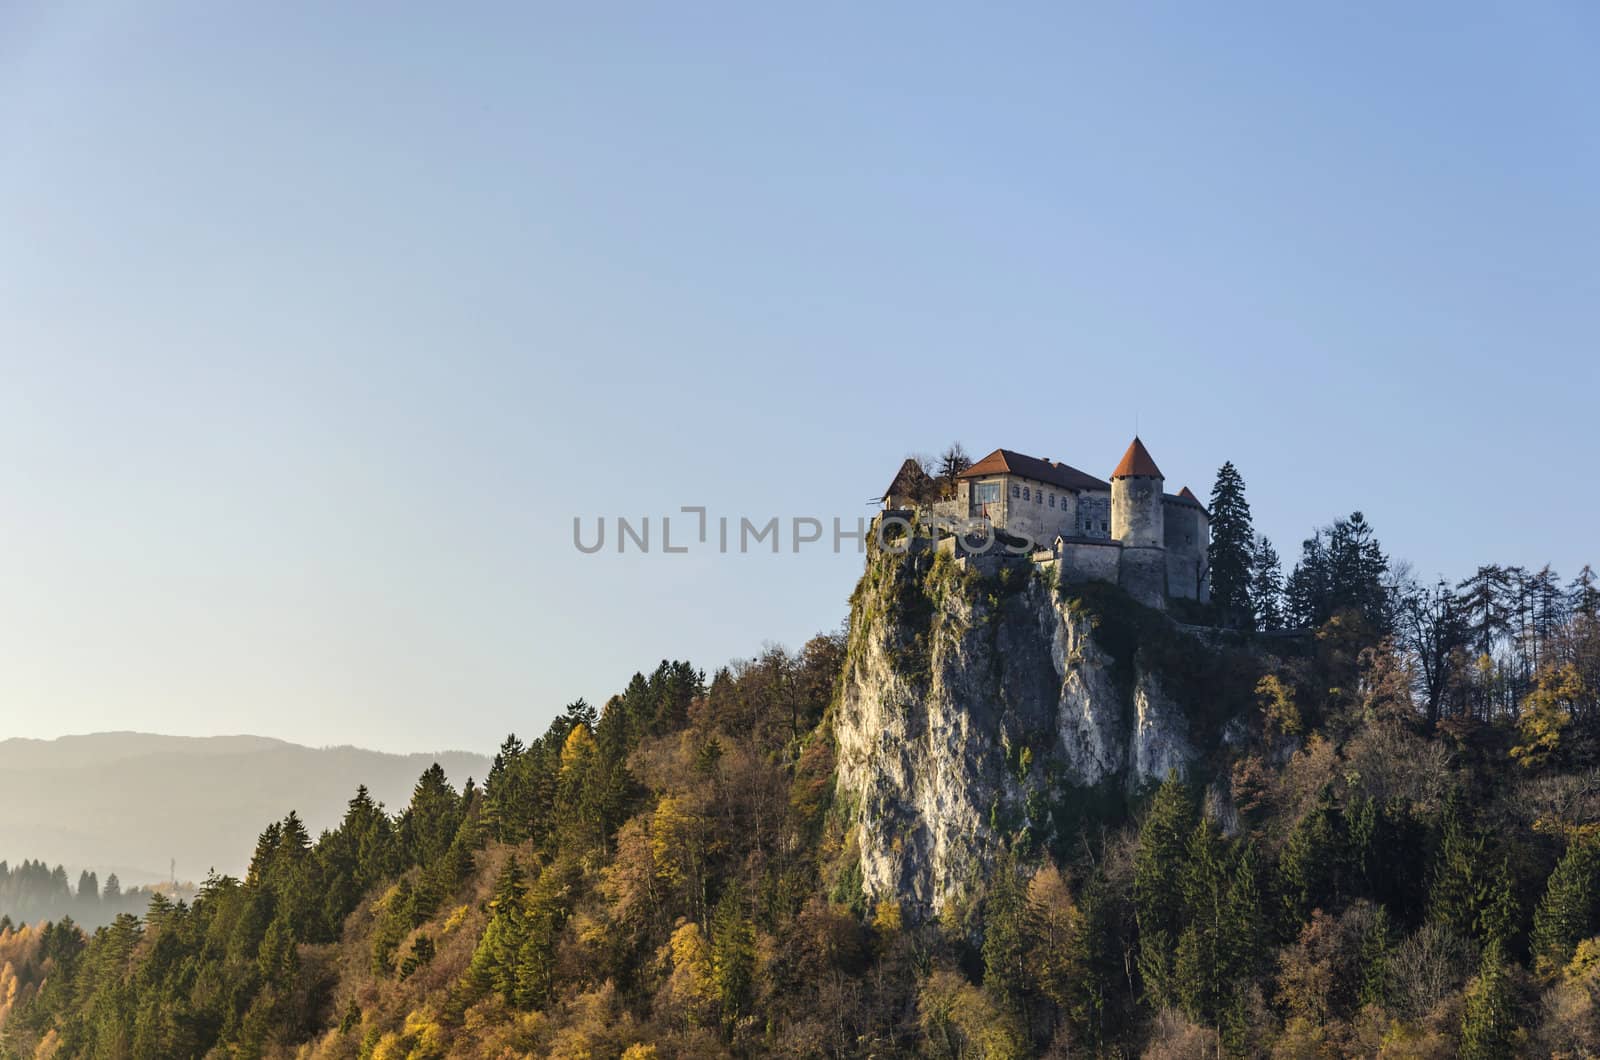 Bled castle on top of the hill dominating the area, Slovenia.